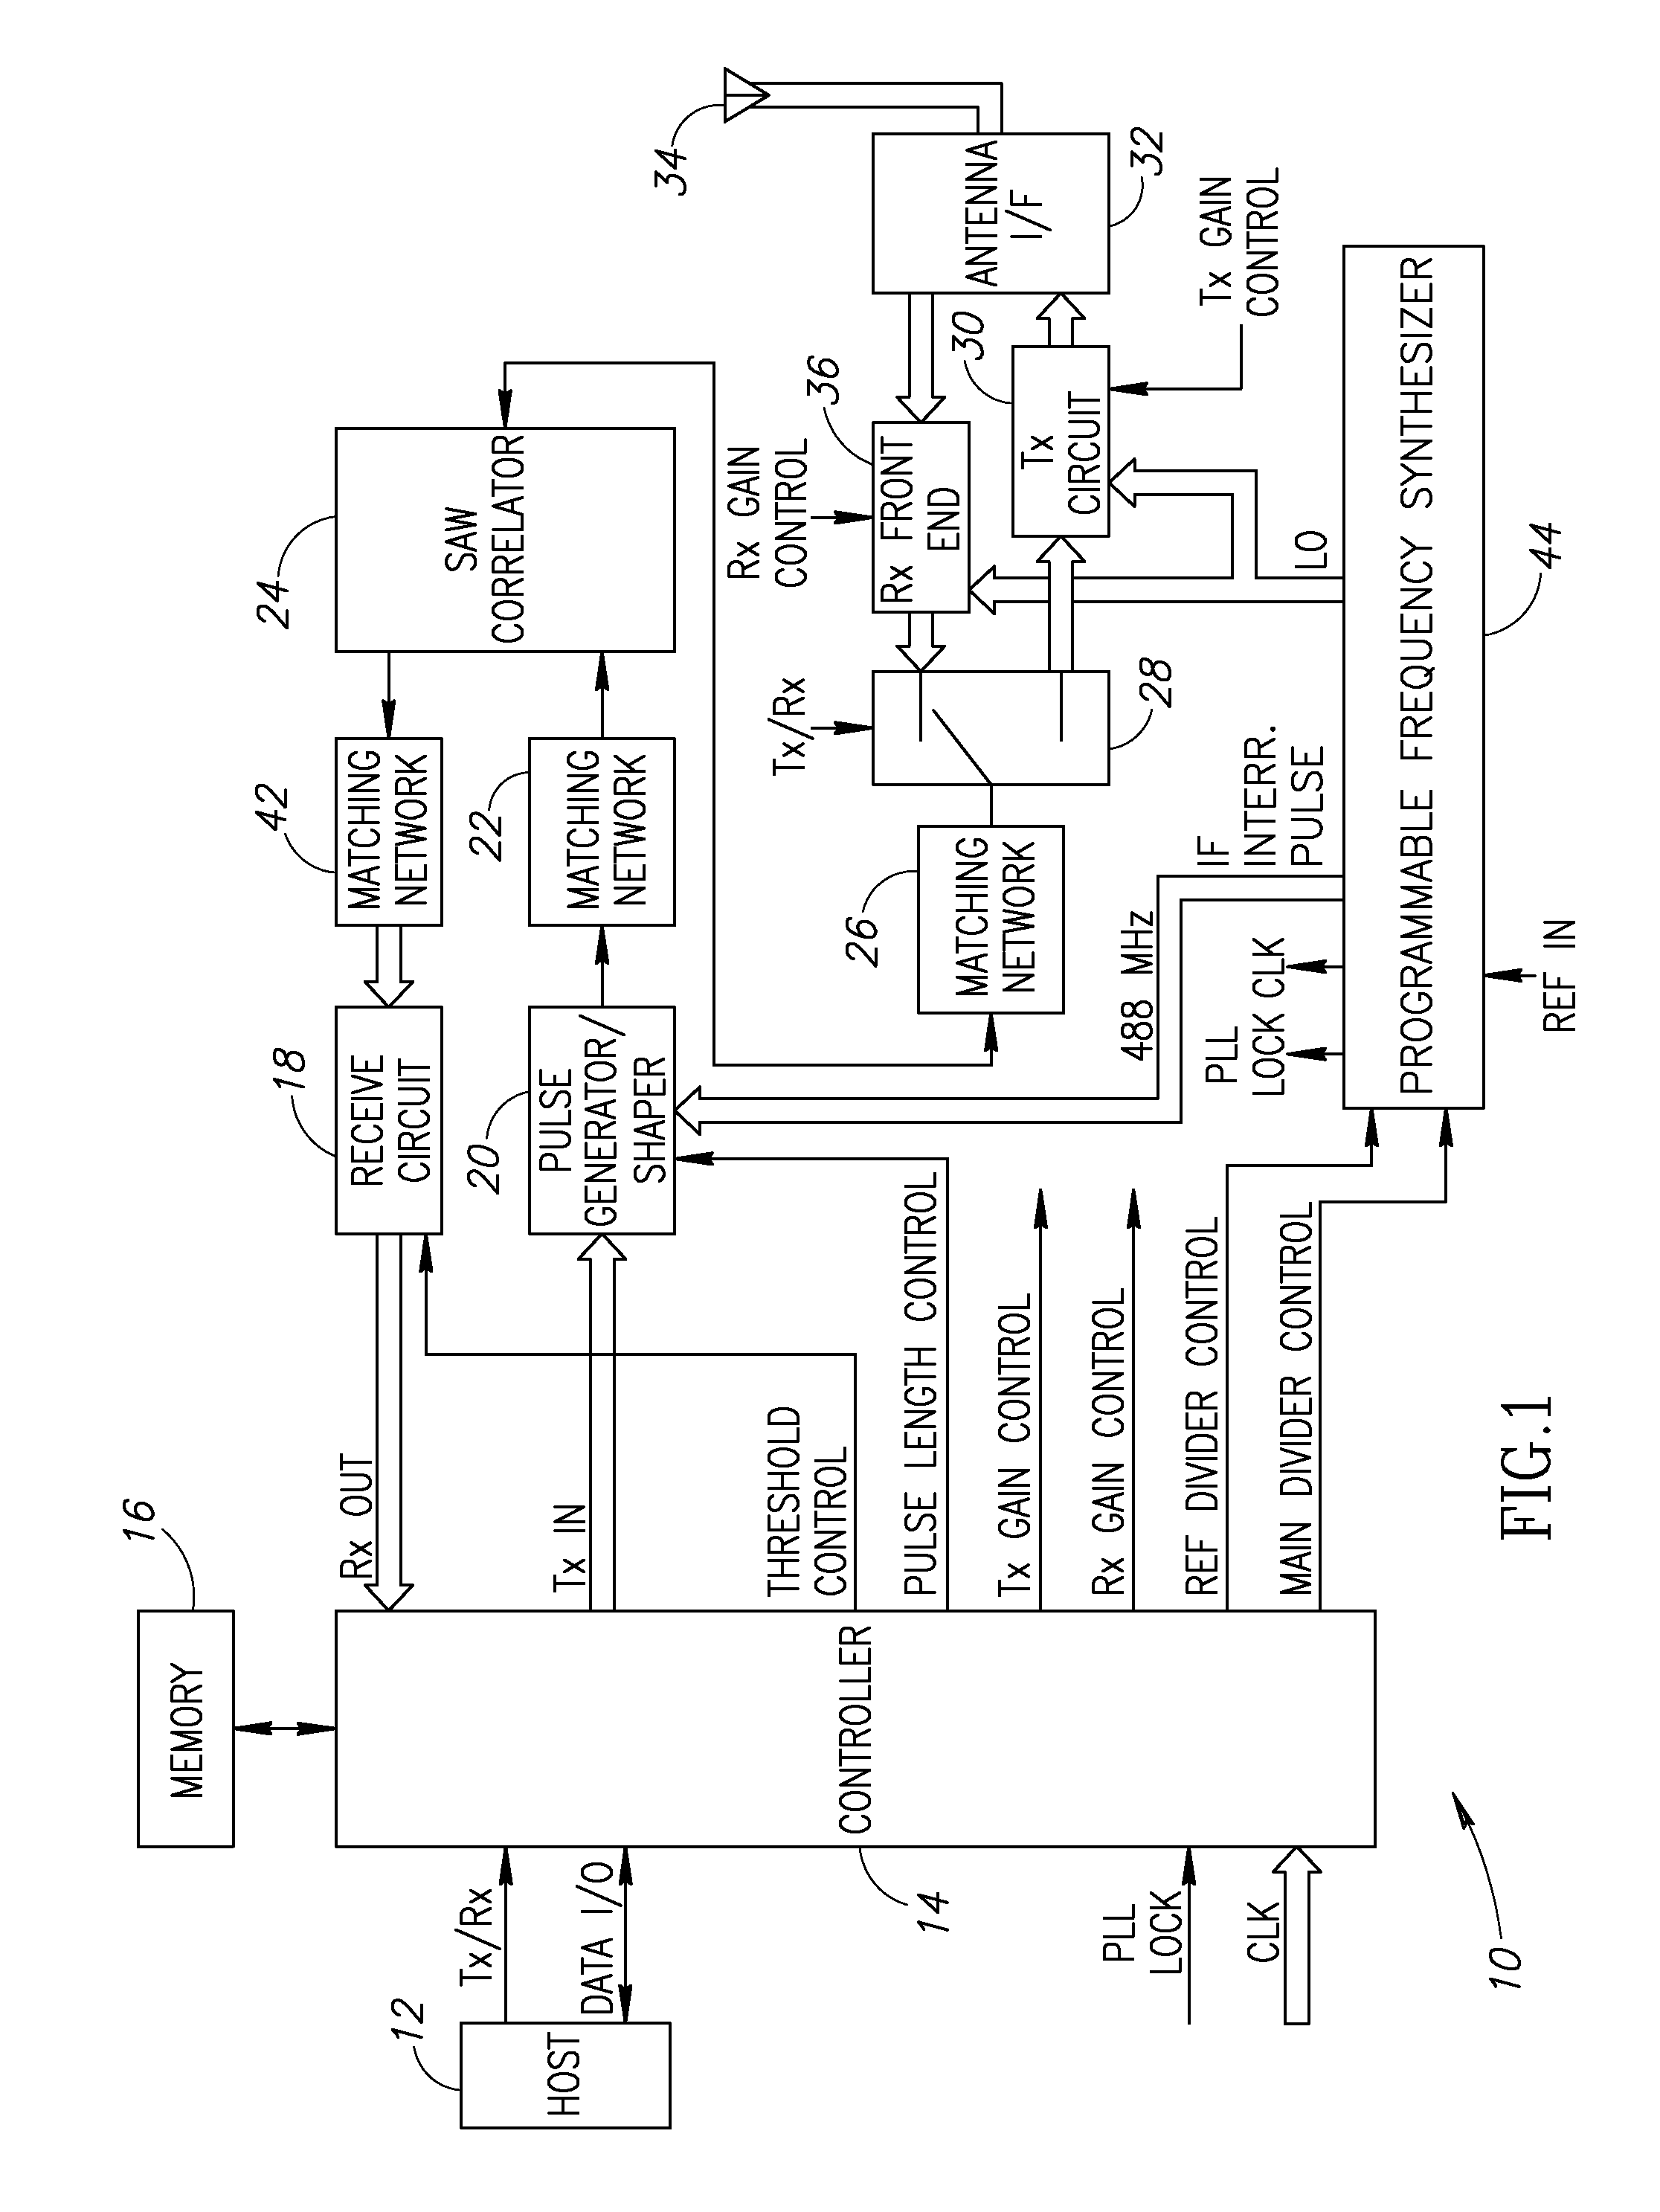 RF modem utilizing saw device with pulse shaping and programmable frequency synthesizer